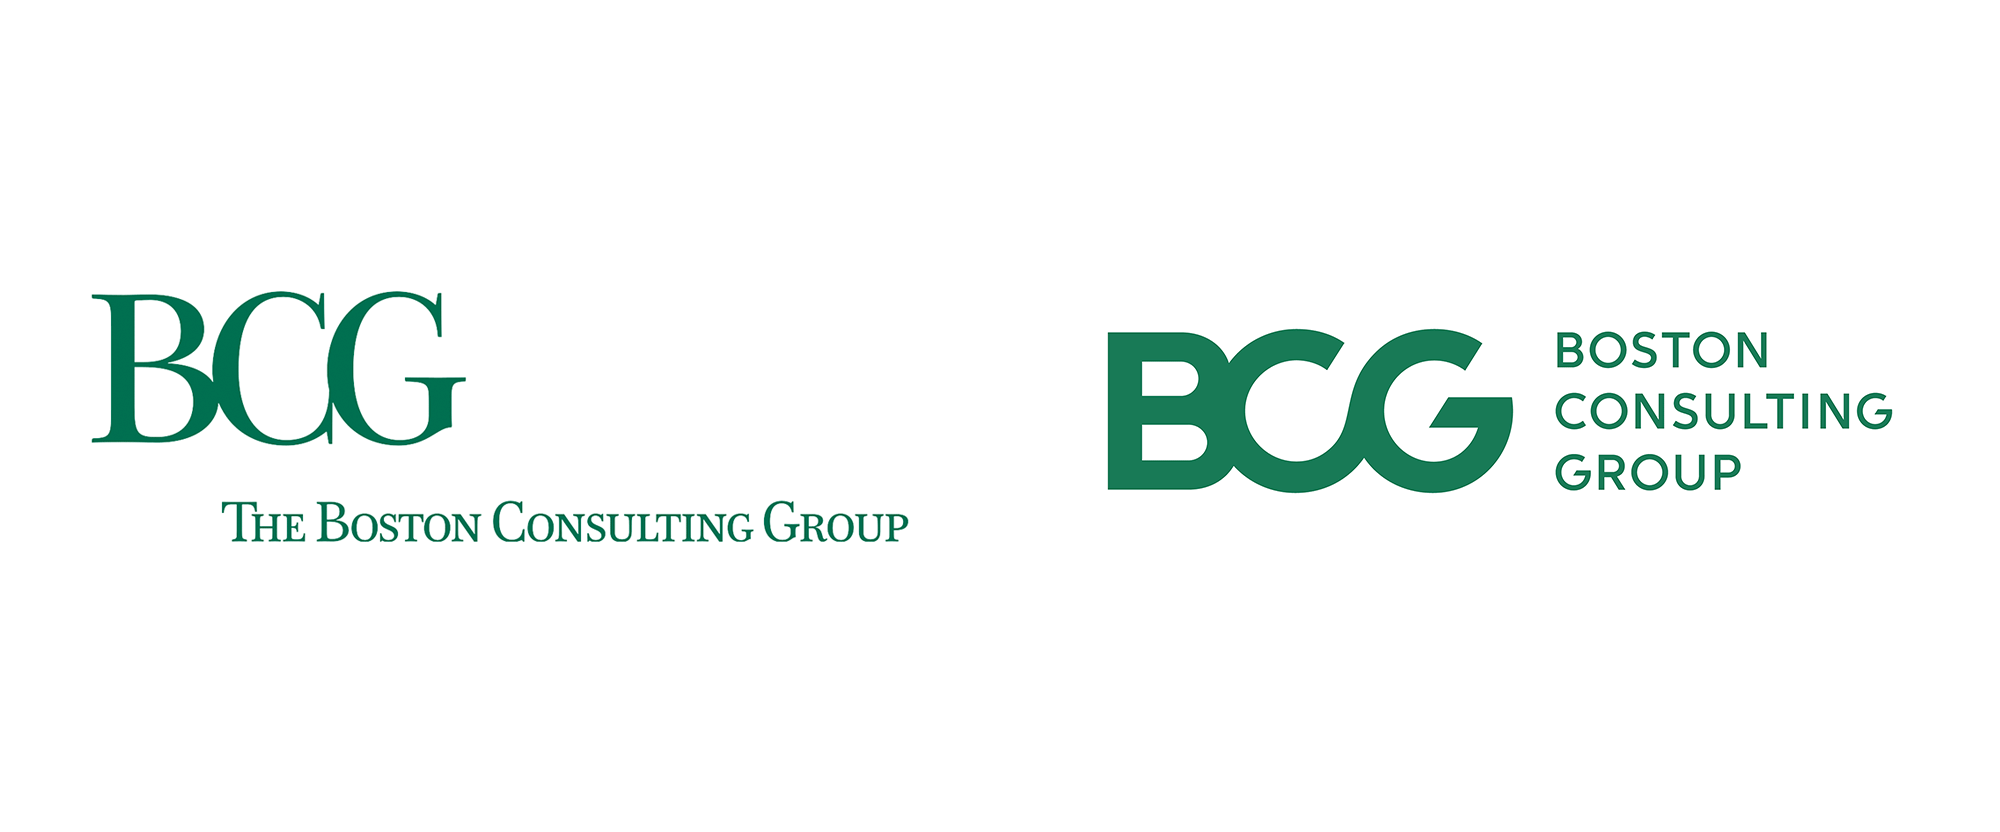 Brand New Logo - Brand New: New Logo and Identity for Boston Consulting Group by ...